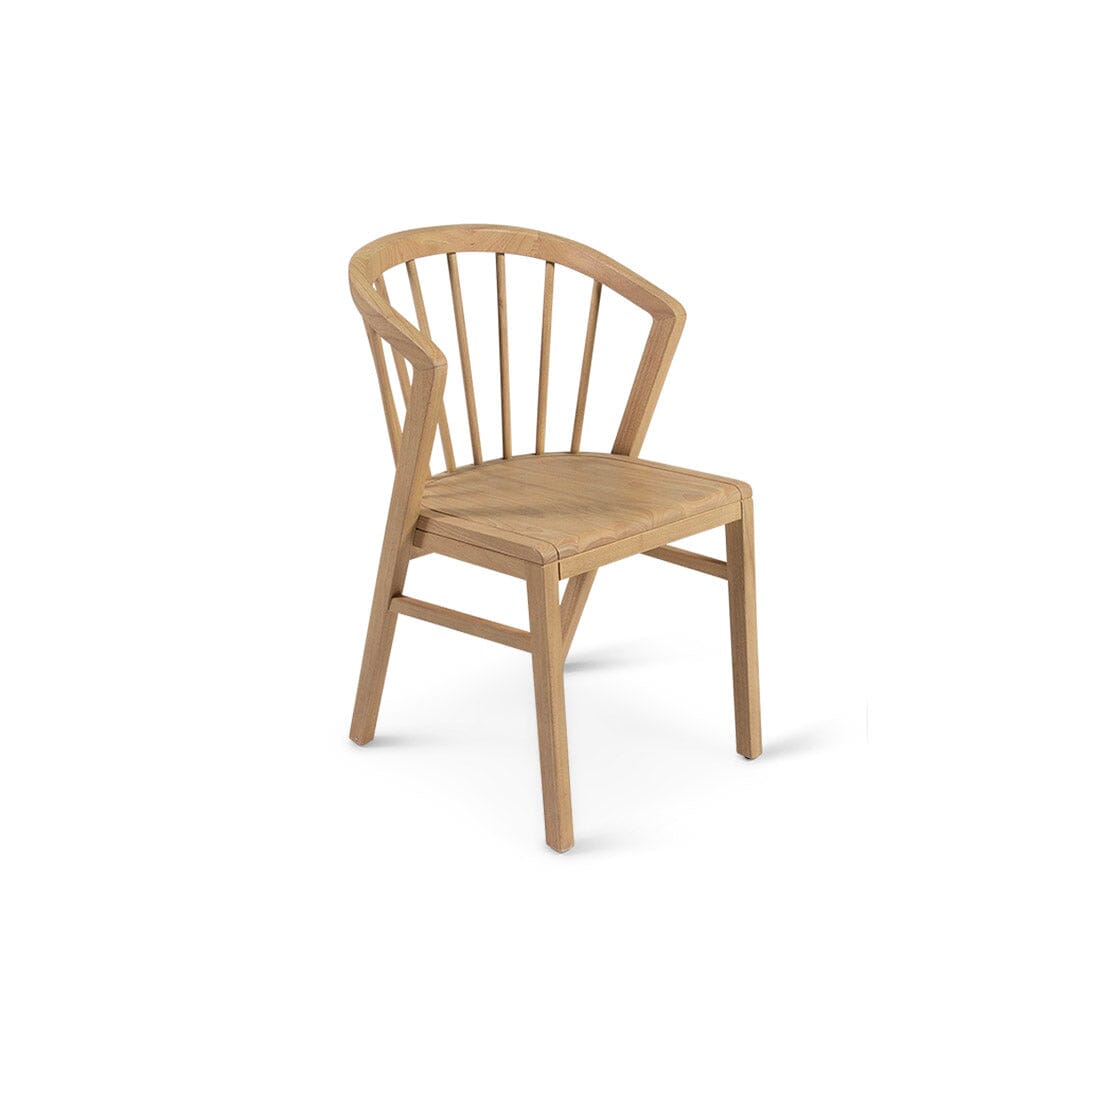 Wooden Spindle Dining Chairs Set of 2 - Pale Oak